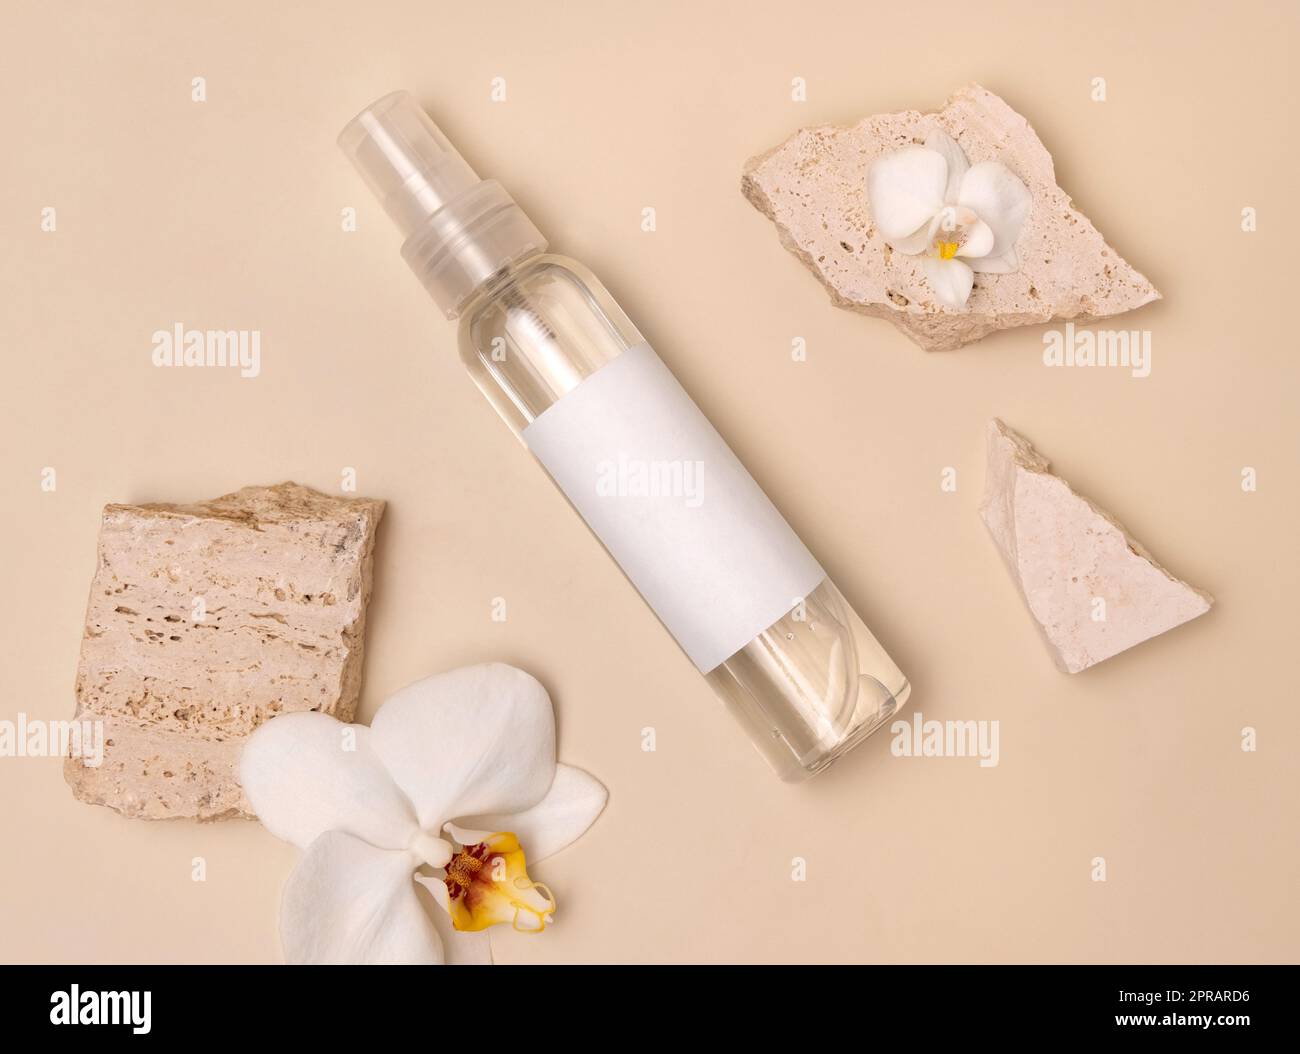 Spray dispenser bottle near white orchid flowers and stones on light beige top view, Mockup Stock Photo